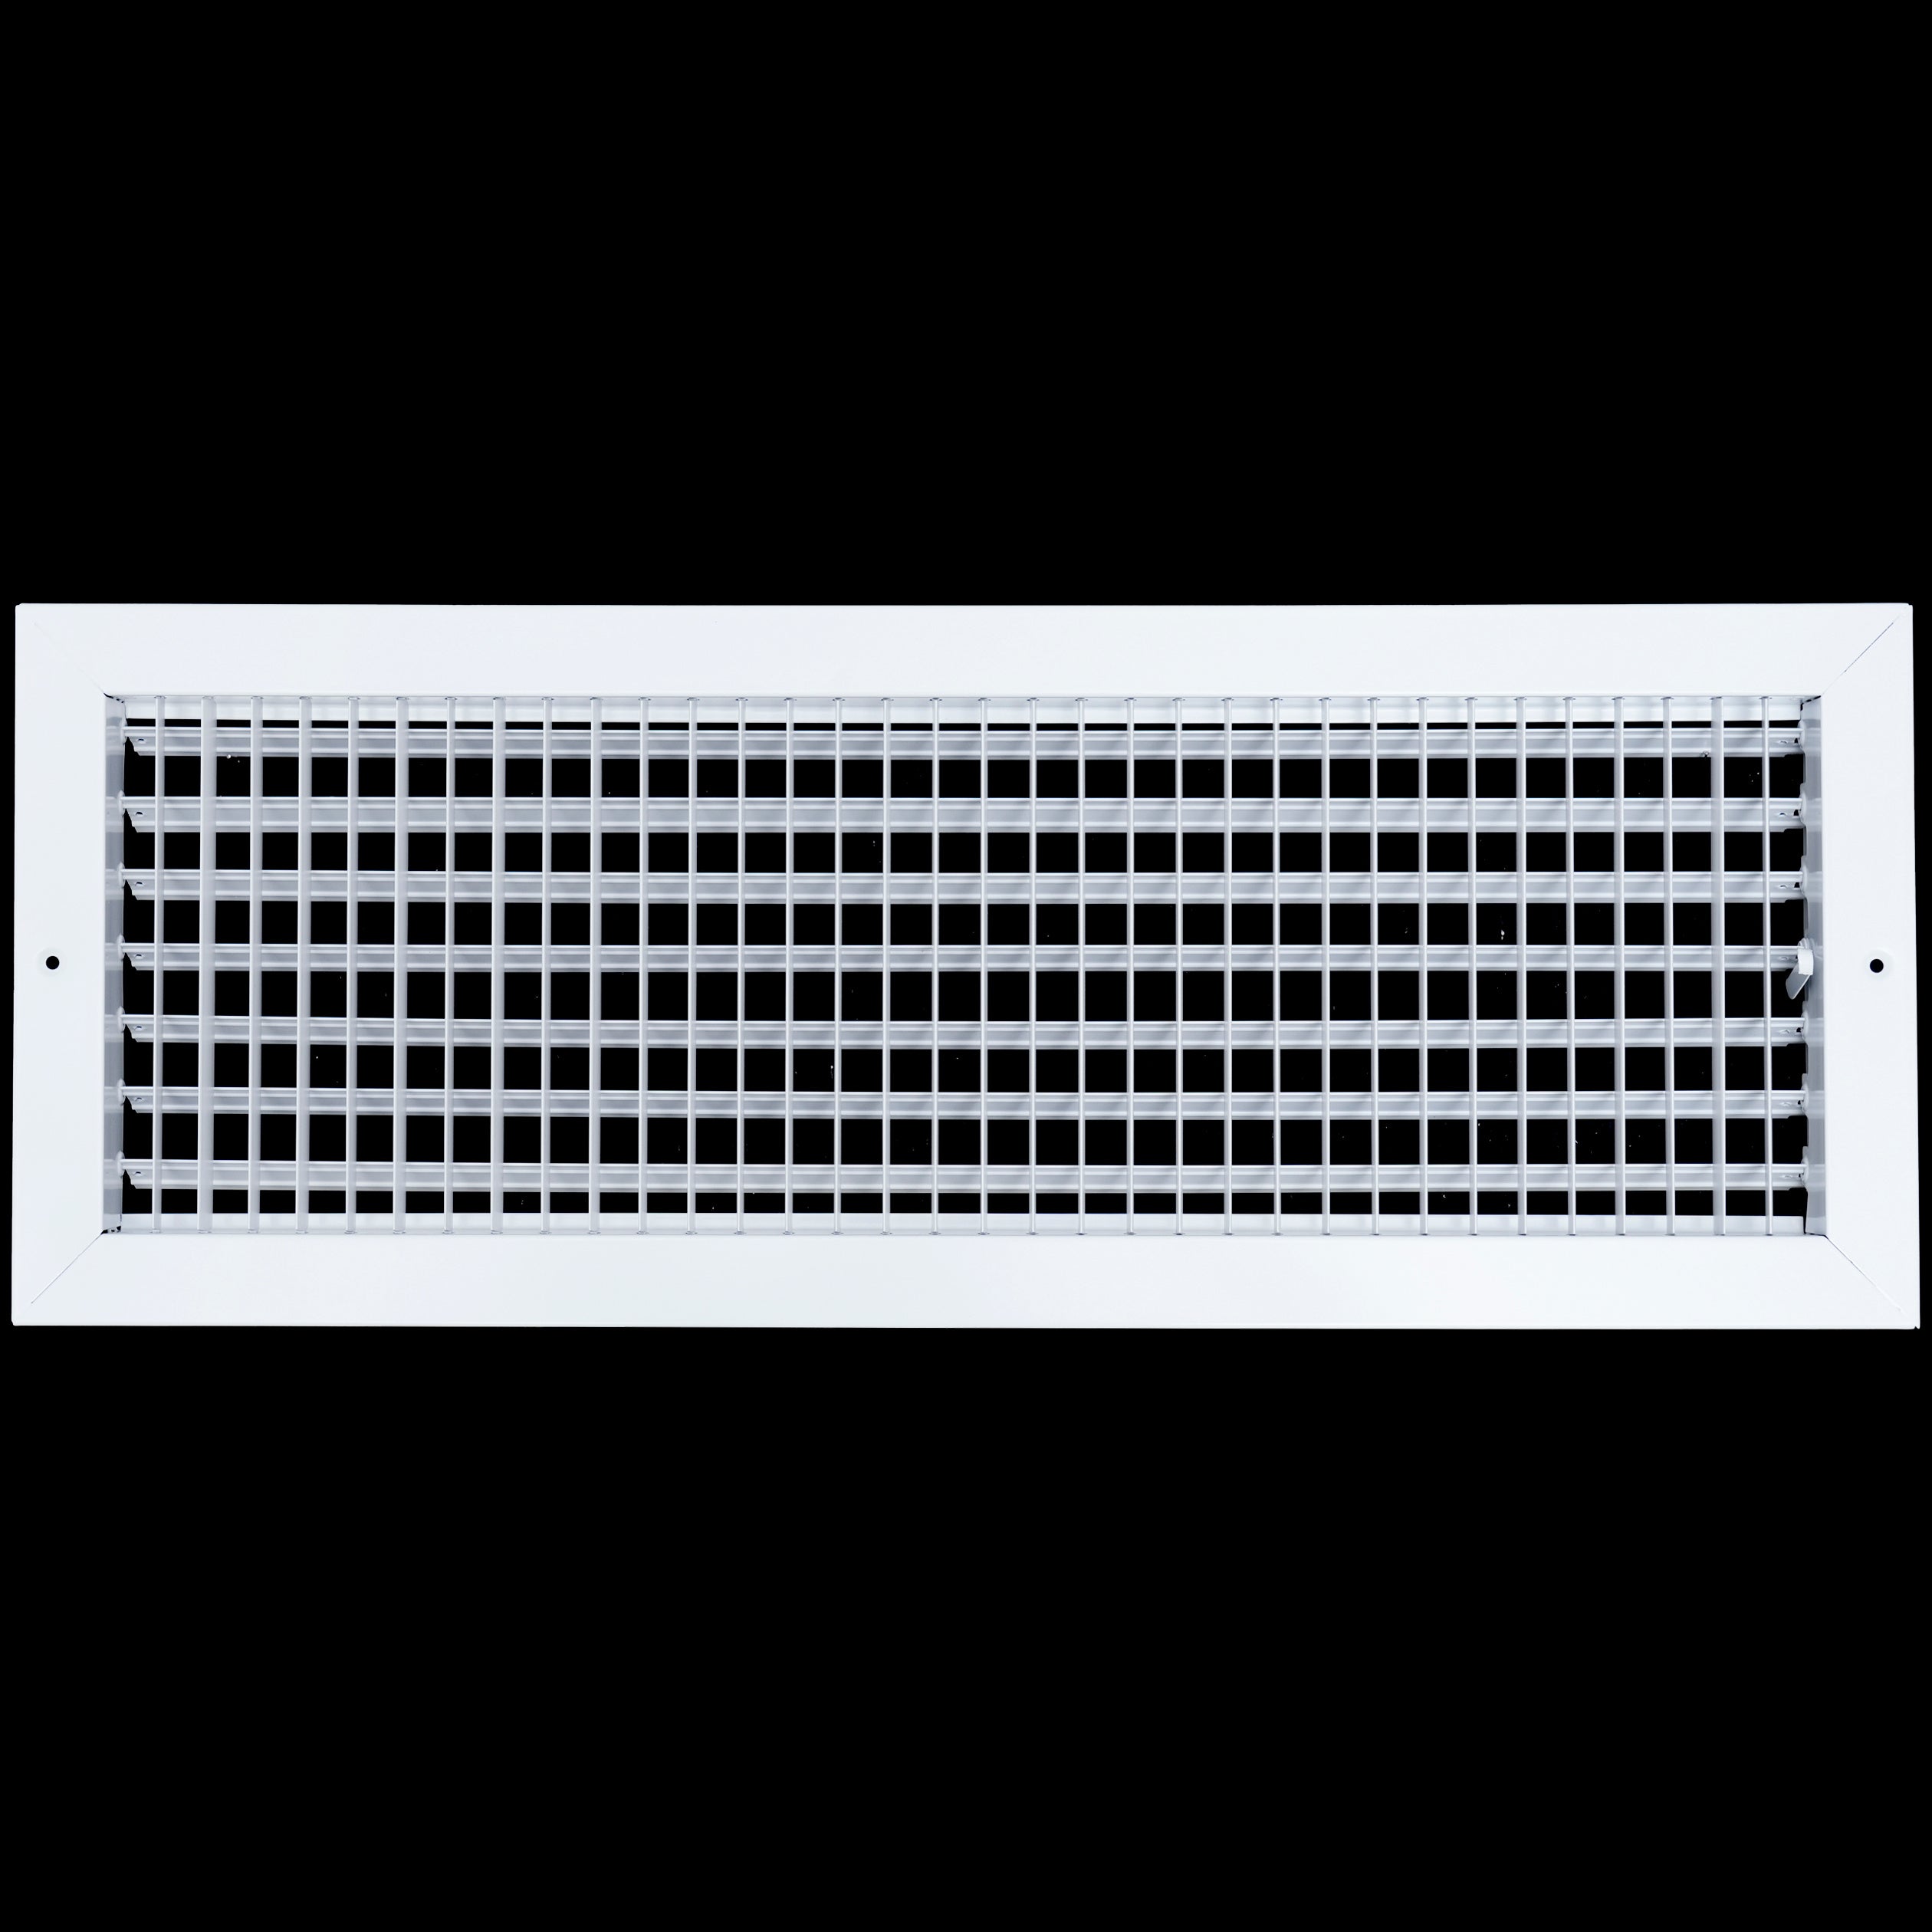 airgrilles 24x8 steel adjustable air supply grille register vent cover grill for sidewall and ceiling White  Outer Dimensions: 25.75"W X 9.75"H for 24x8 Duct Opening